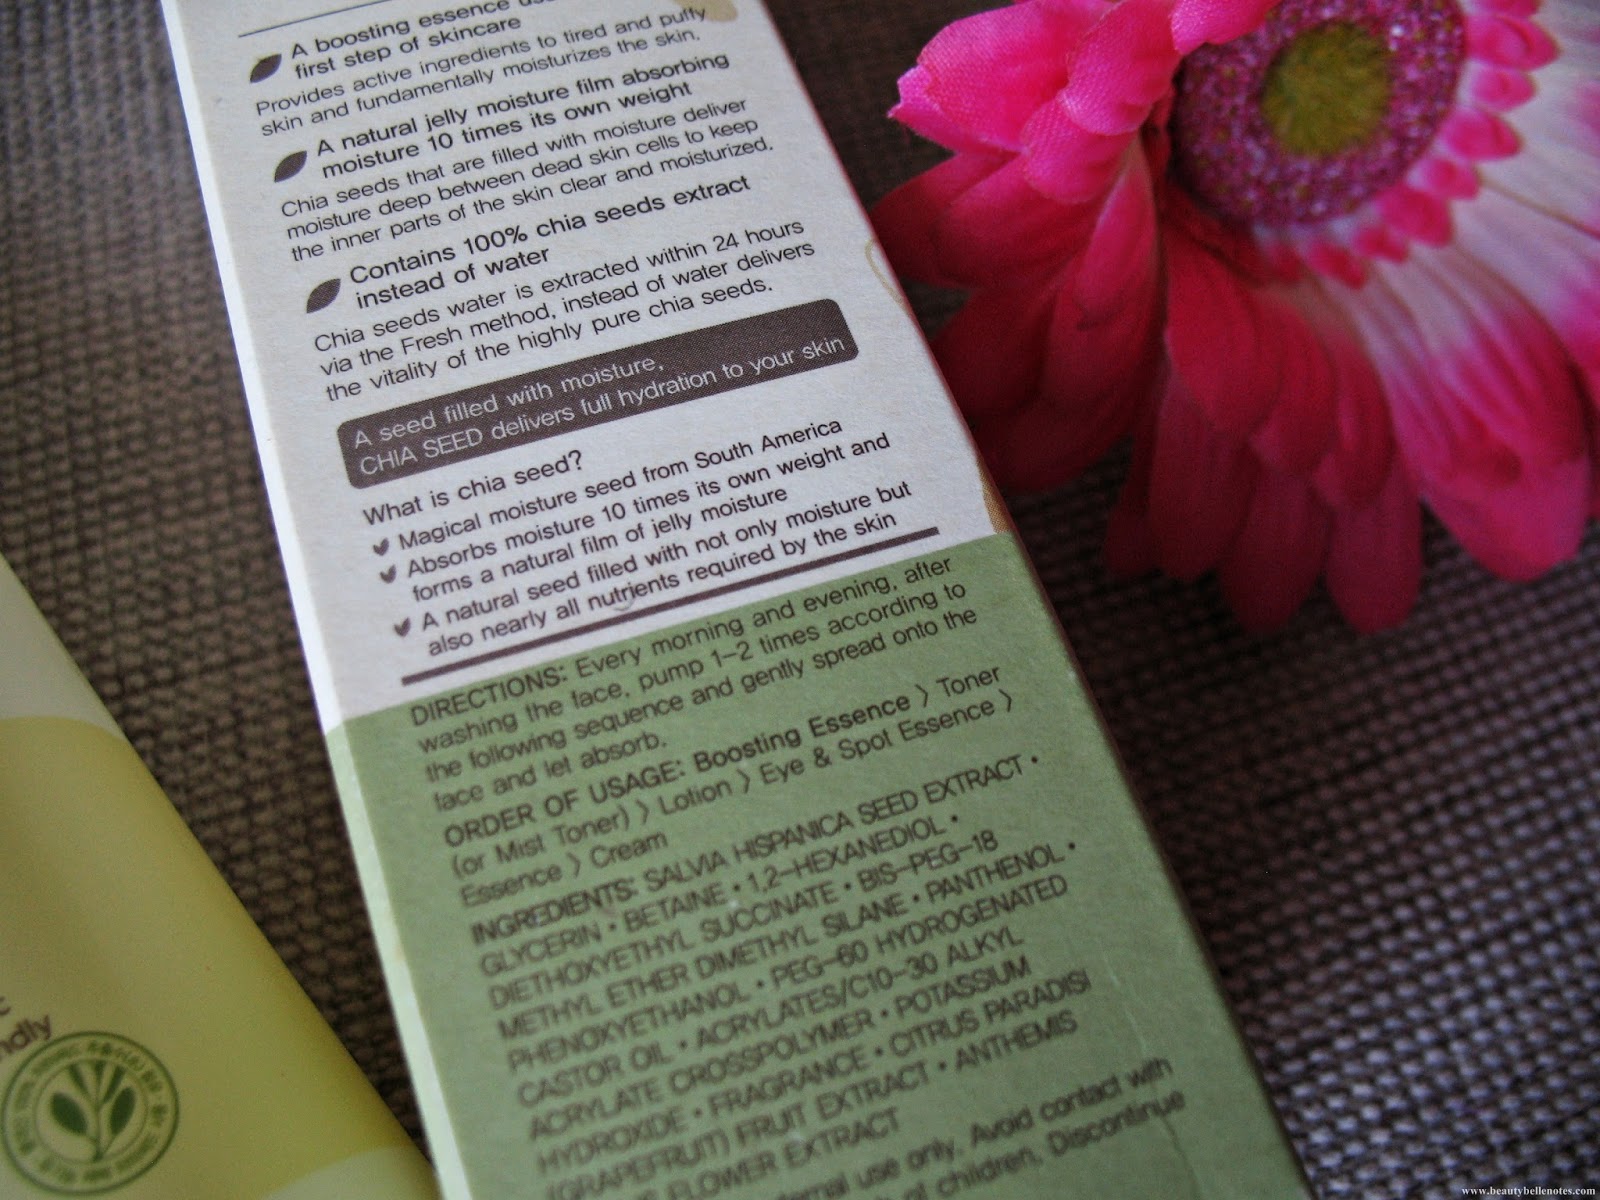 TheFaceShop - Chia Seed Boosting Essence review and photos